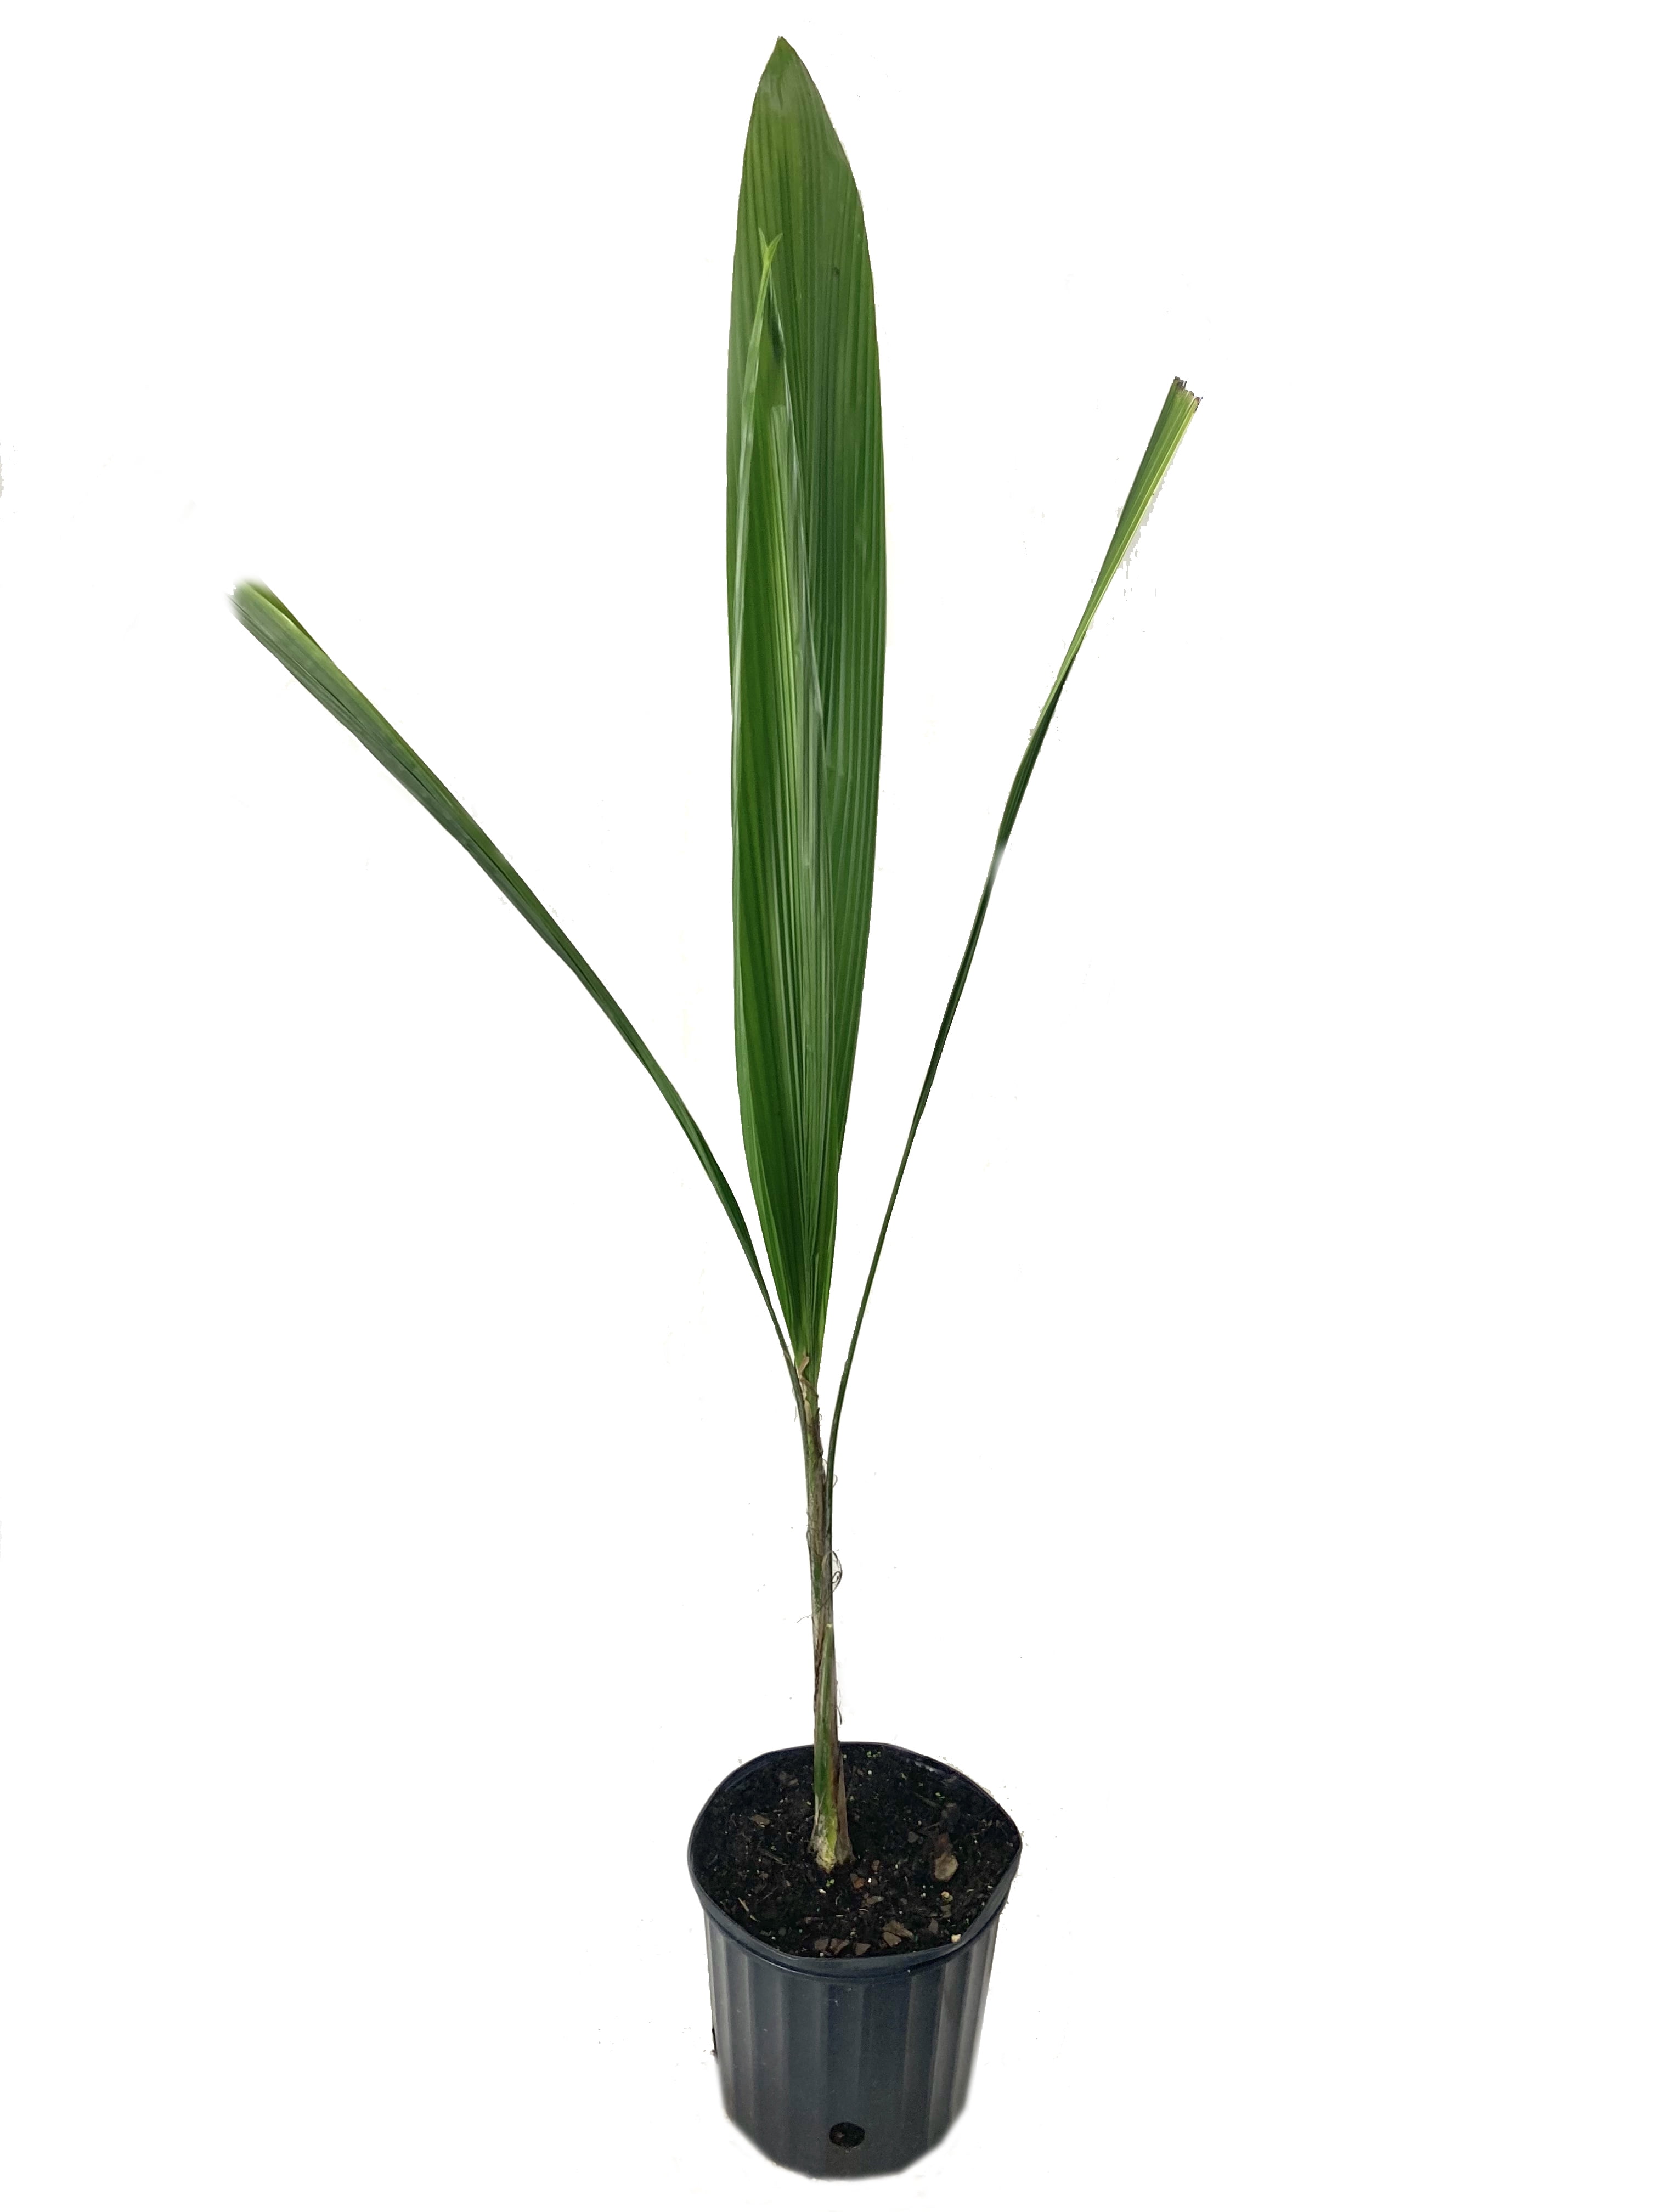 Queen Palm - Live Plant in a 10 inch Growers Pot - Arecastrum ...